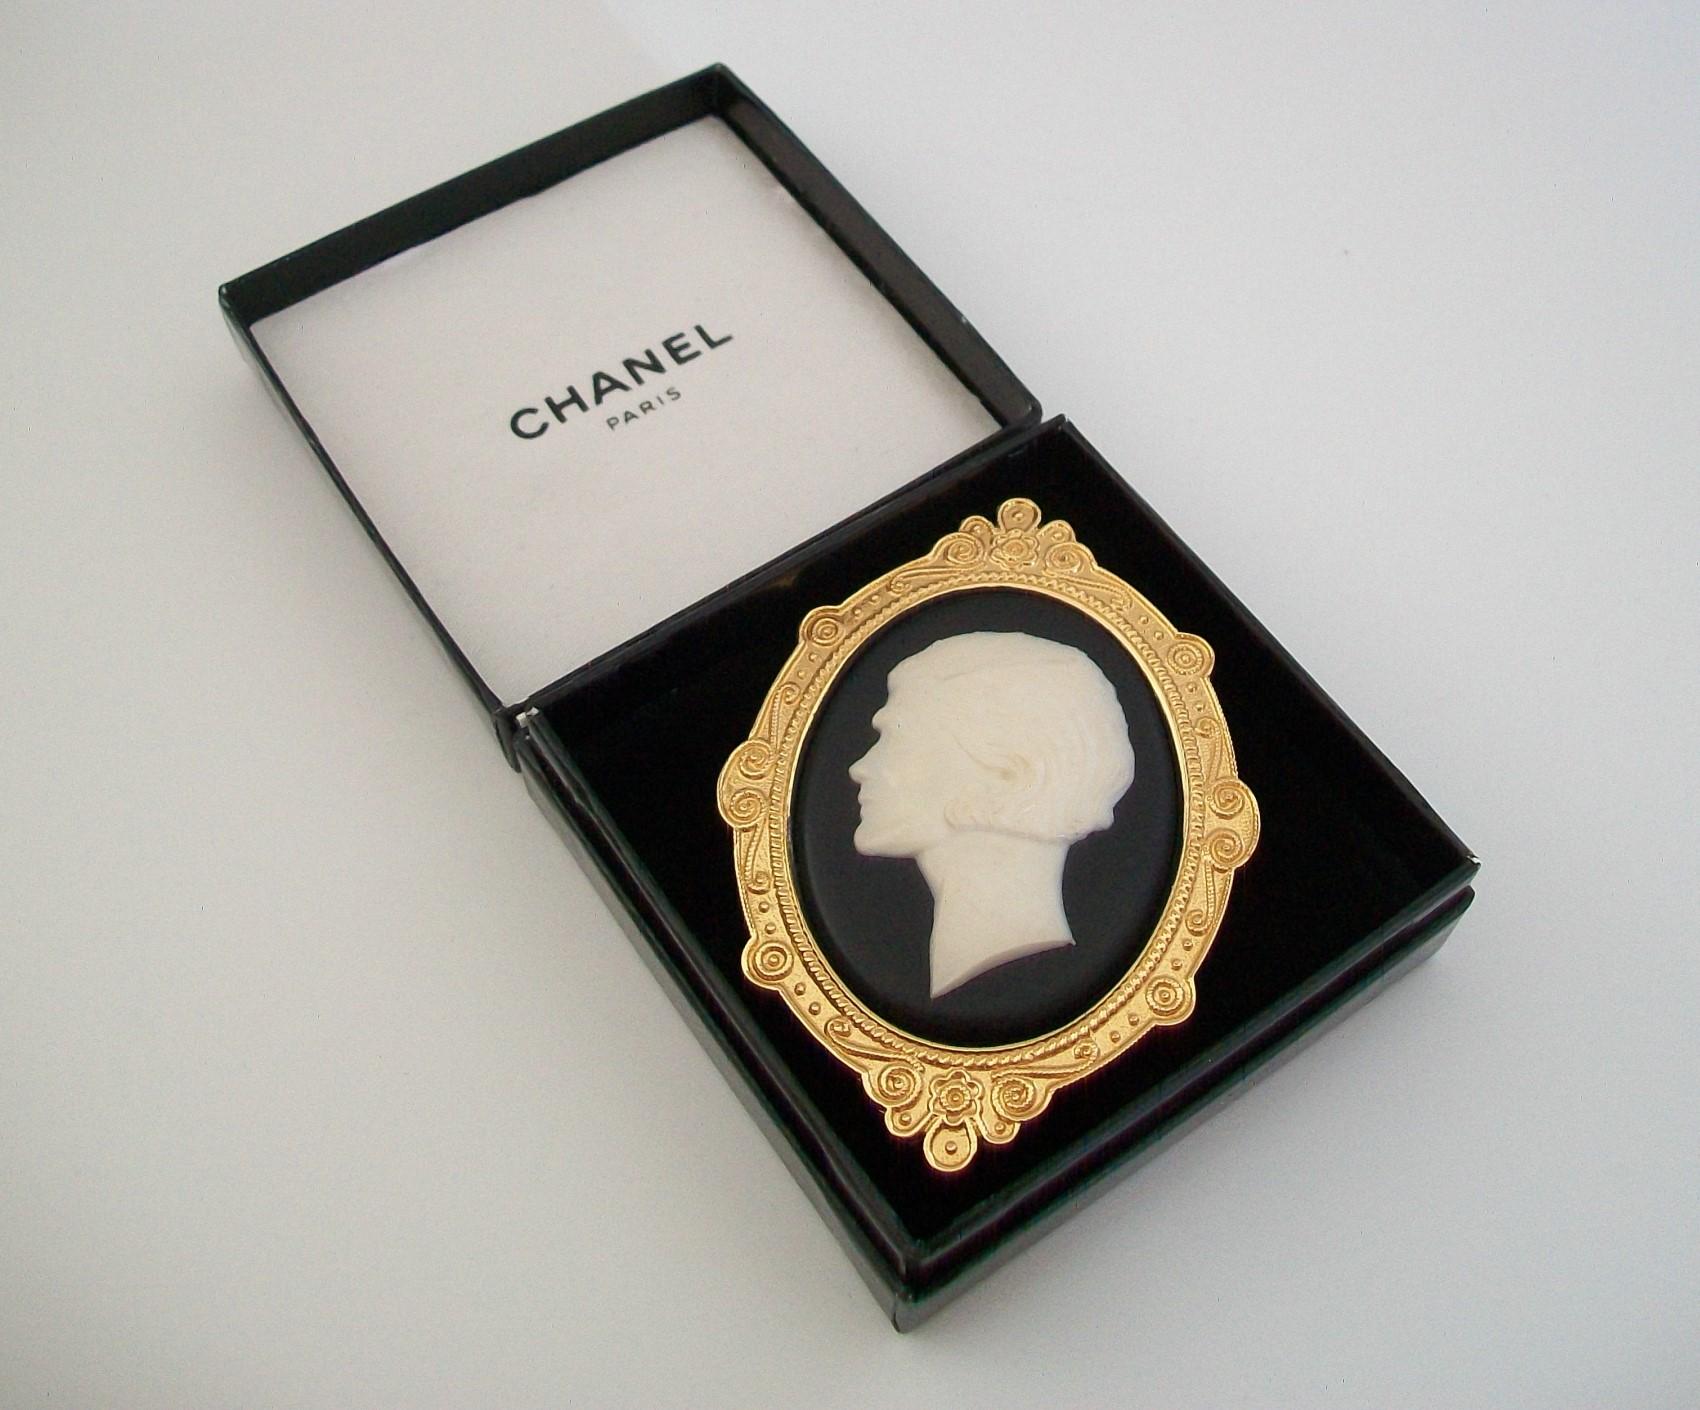 CHANEL - Vintage Over-sized 'Coco' Cameo Brooch - France - Circa 1980's For Sale 7